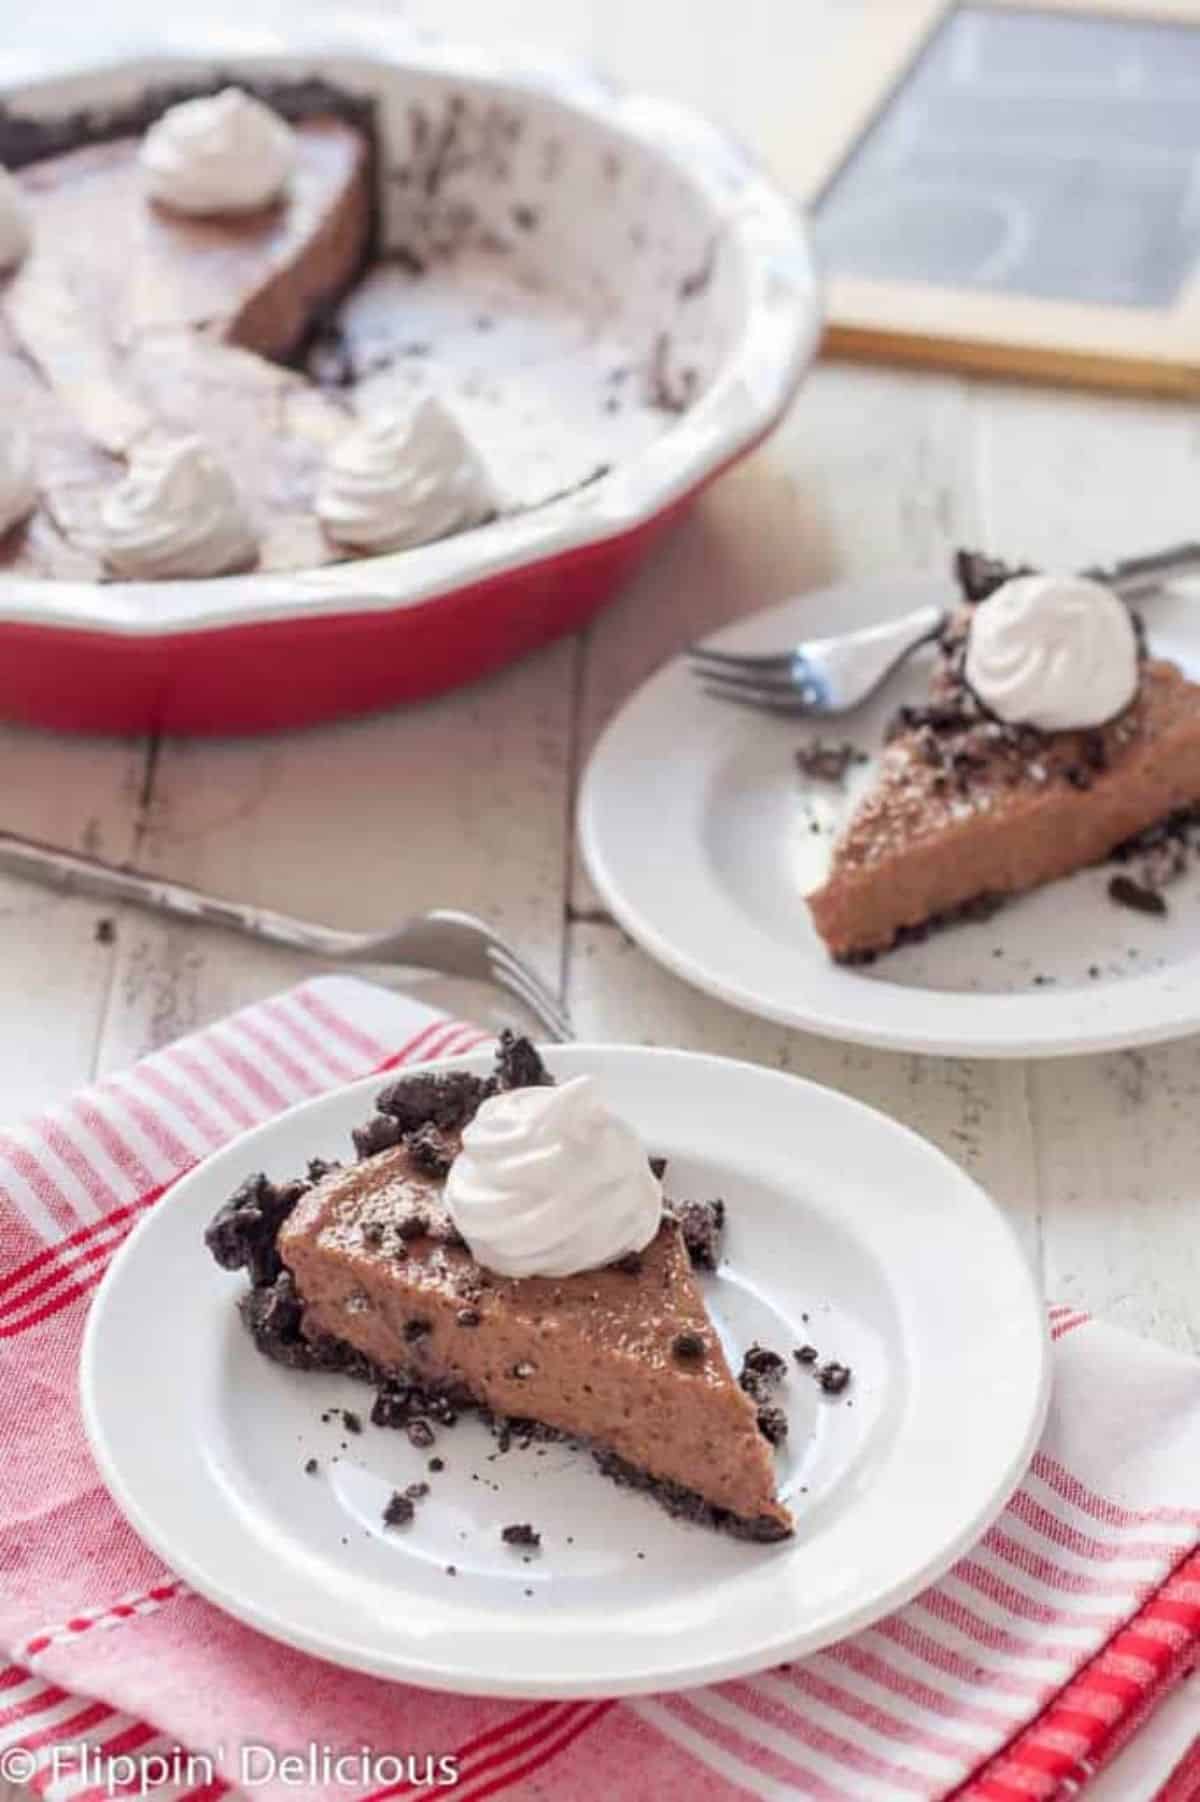 A piece of Vegan Chocolate Pie on a white plate.